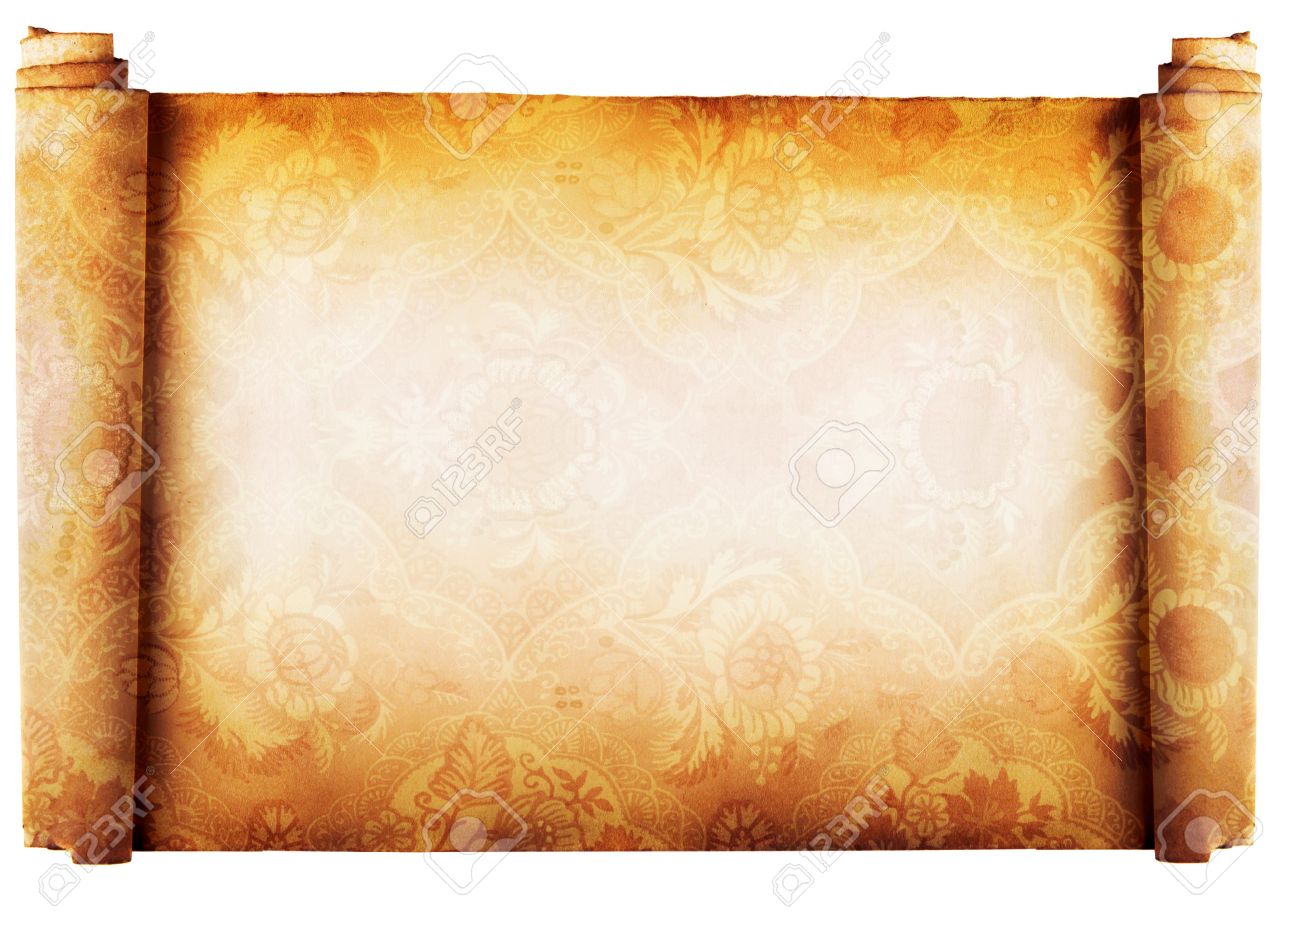 Vintage Roll Of Parchment Background Isolated On White Stock Photo